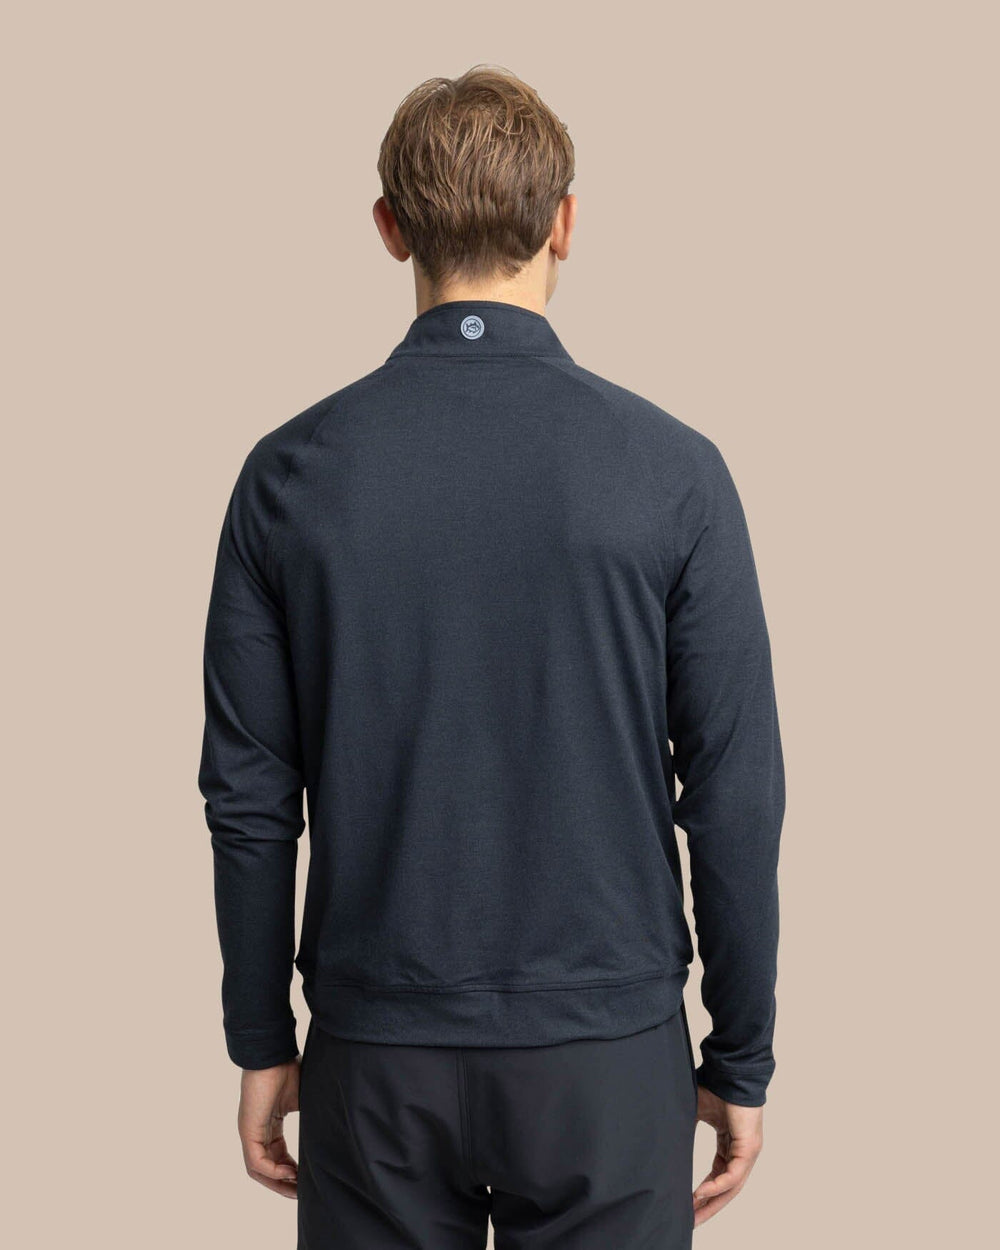 The back view of the Southern Tide Cruiser Heather Quarter Zip Pullover by Southern Tide - Heather Caviar Black